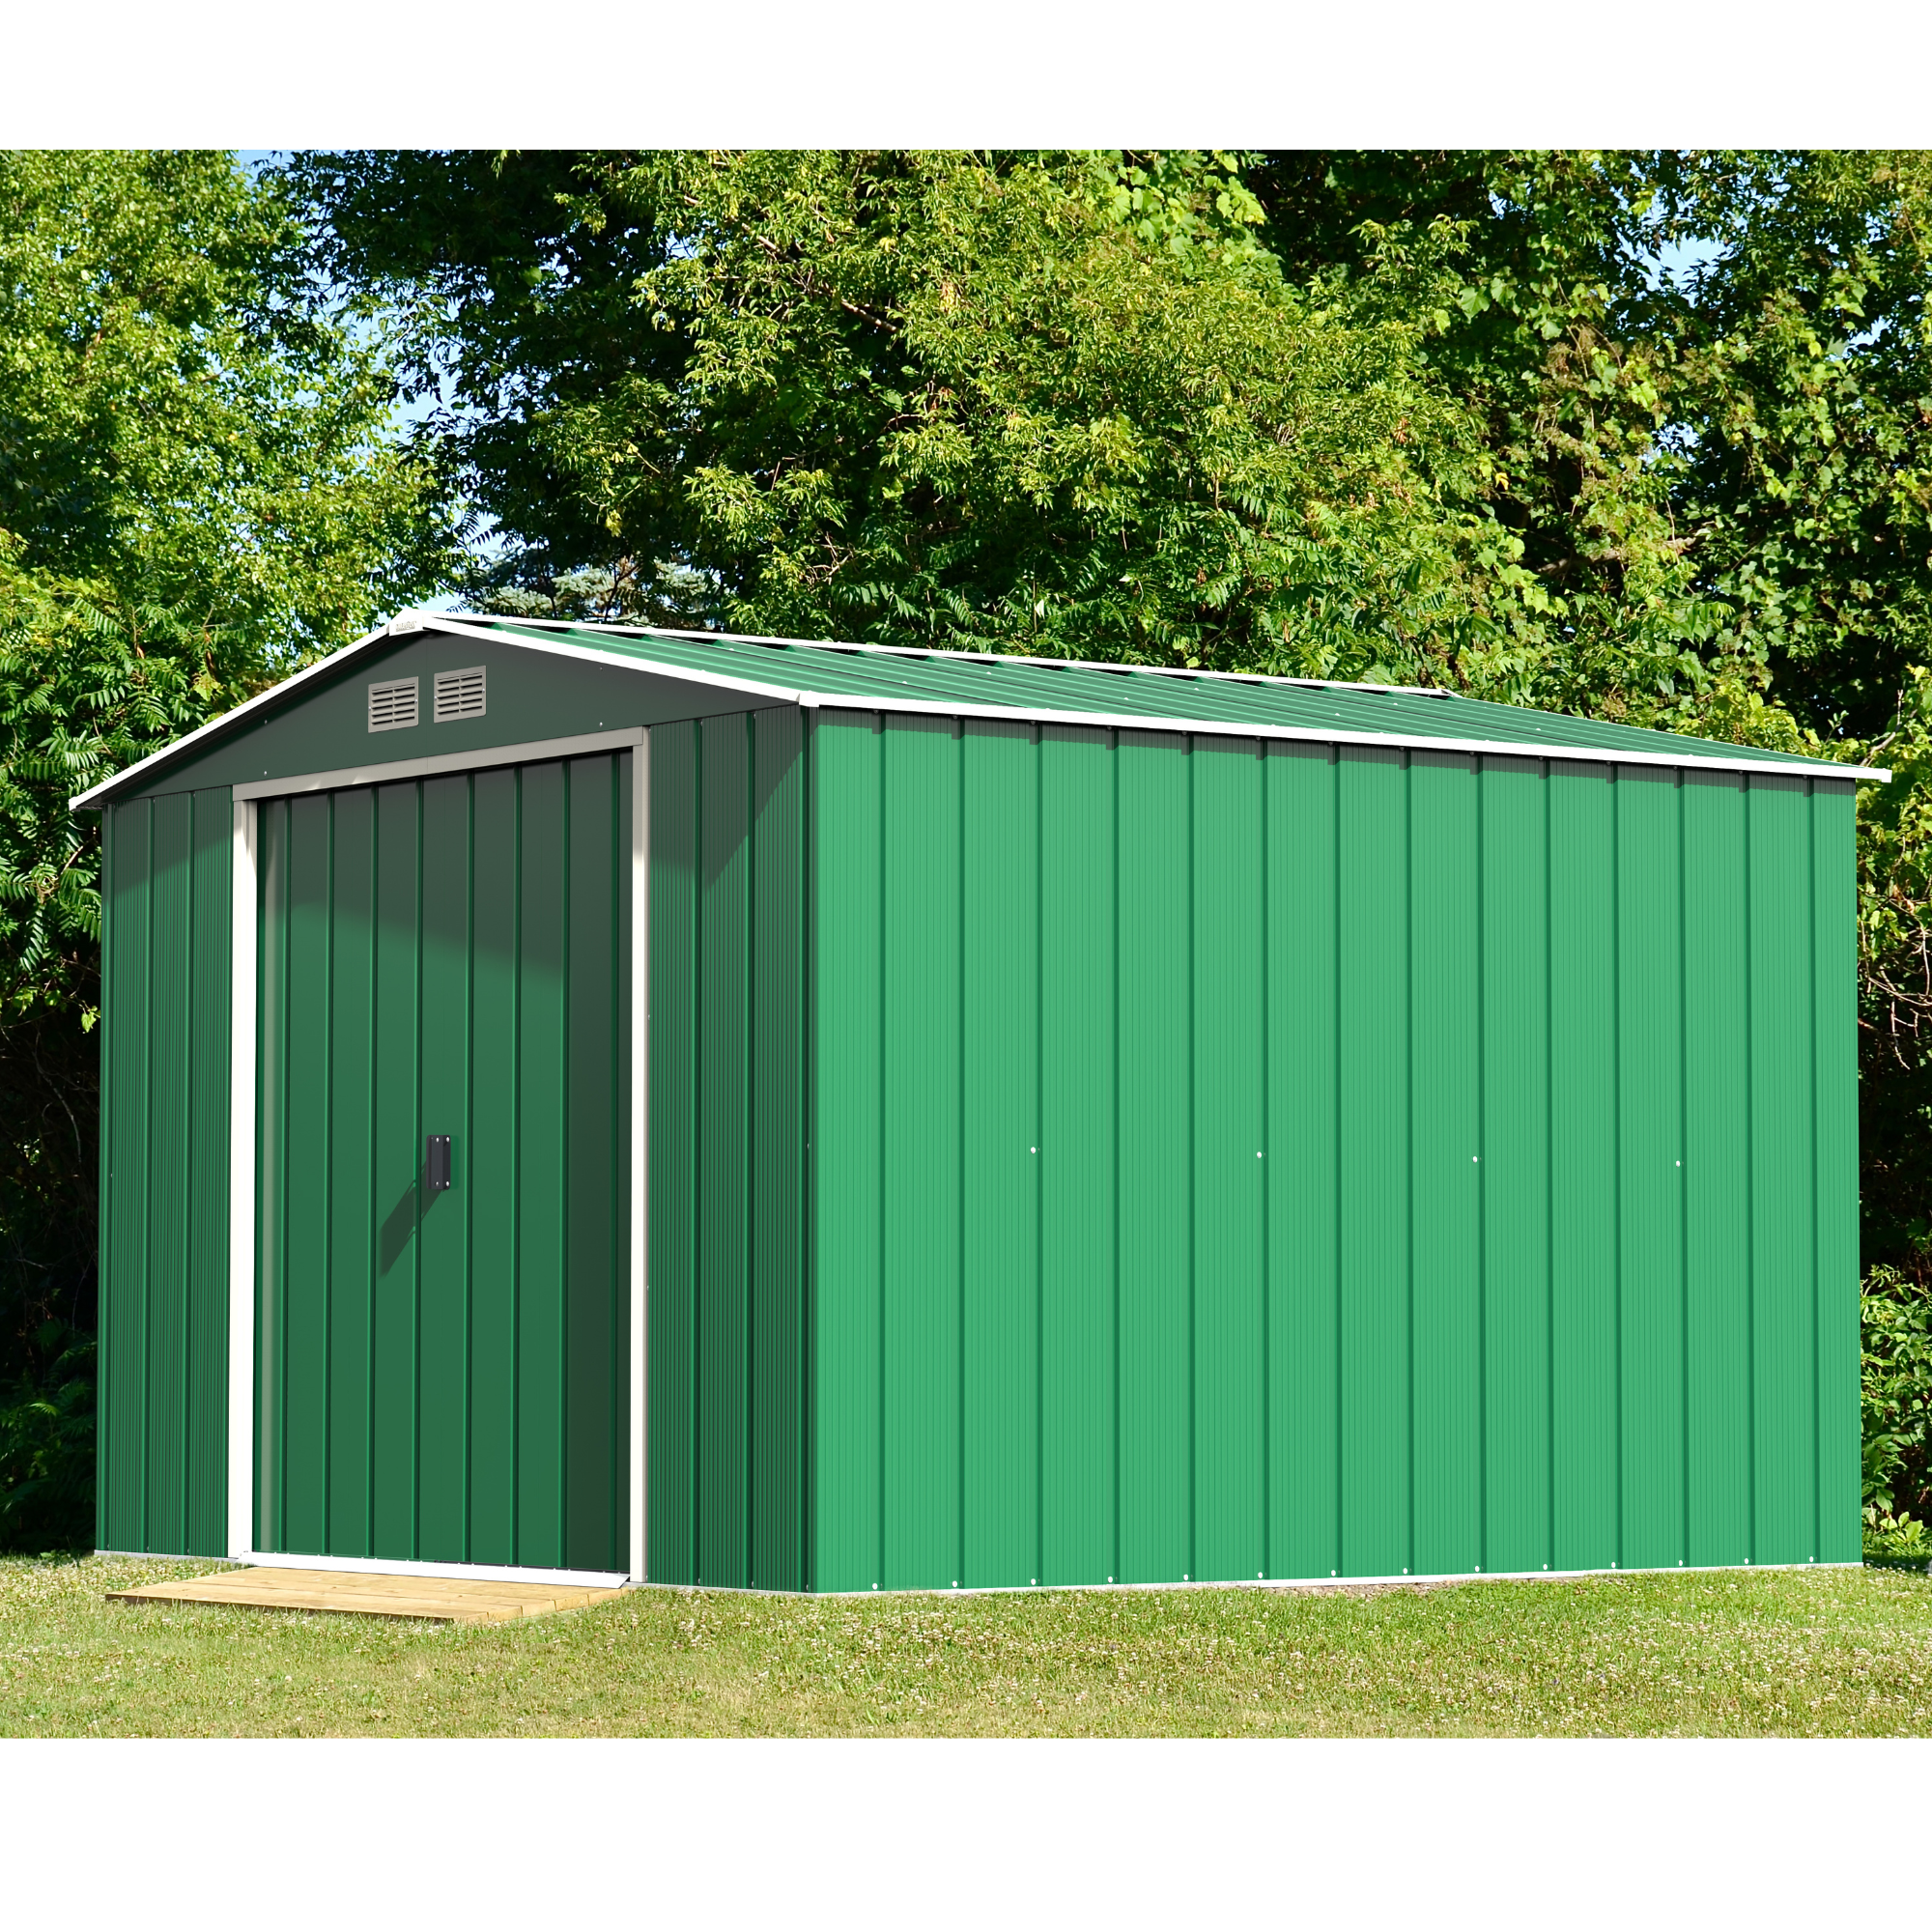 BillyOh Partner Eco Apex Roof Metal Shed - 10x10 Apex Eco